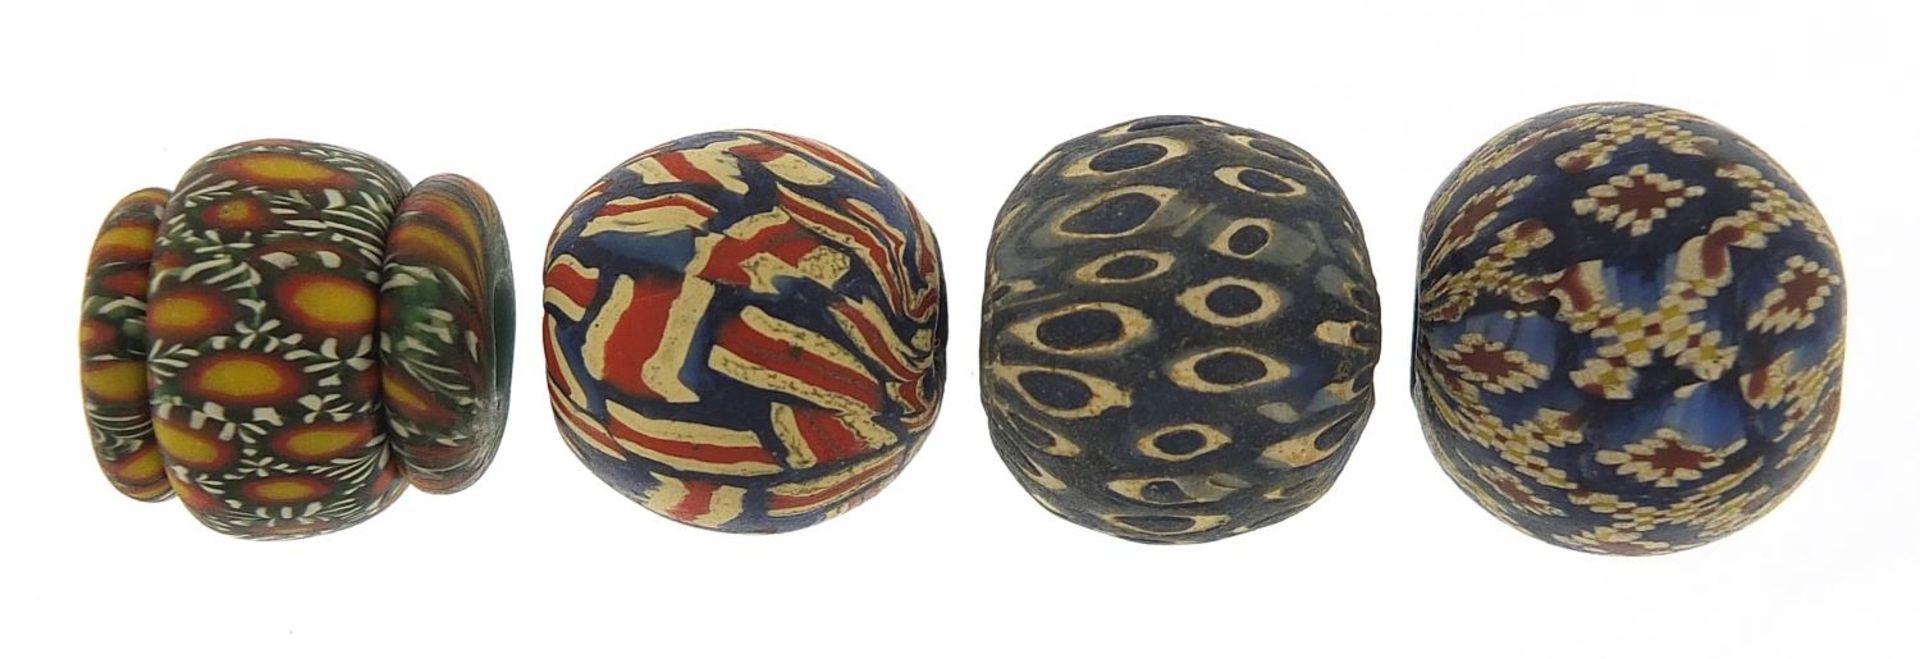 Four Islamic glass beads, each approximately 2cm high - Image 2 of 2